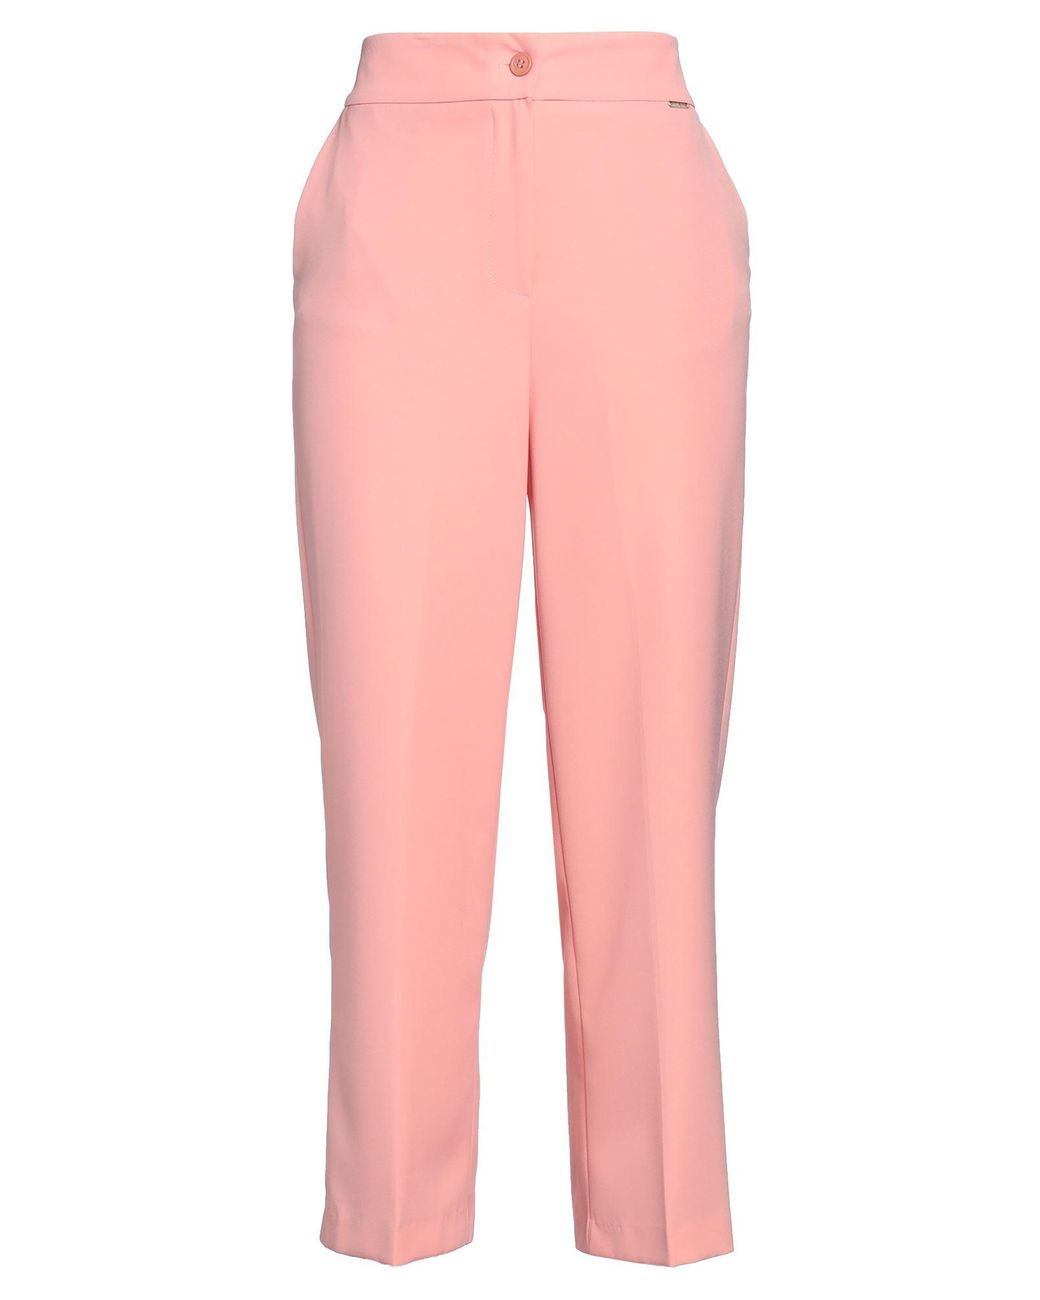 Hanny Deep Pants in Pink | Lyst